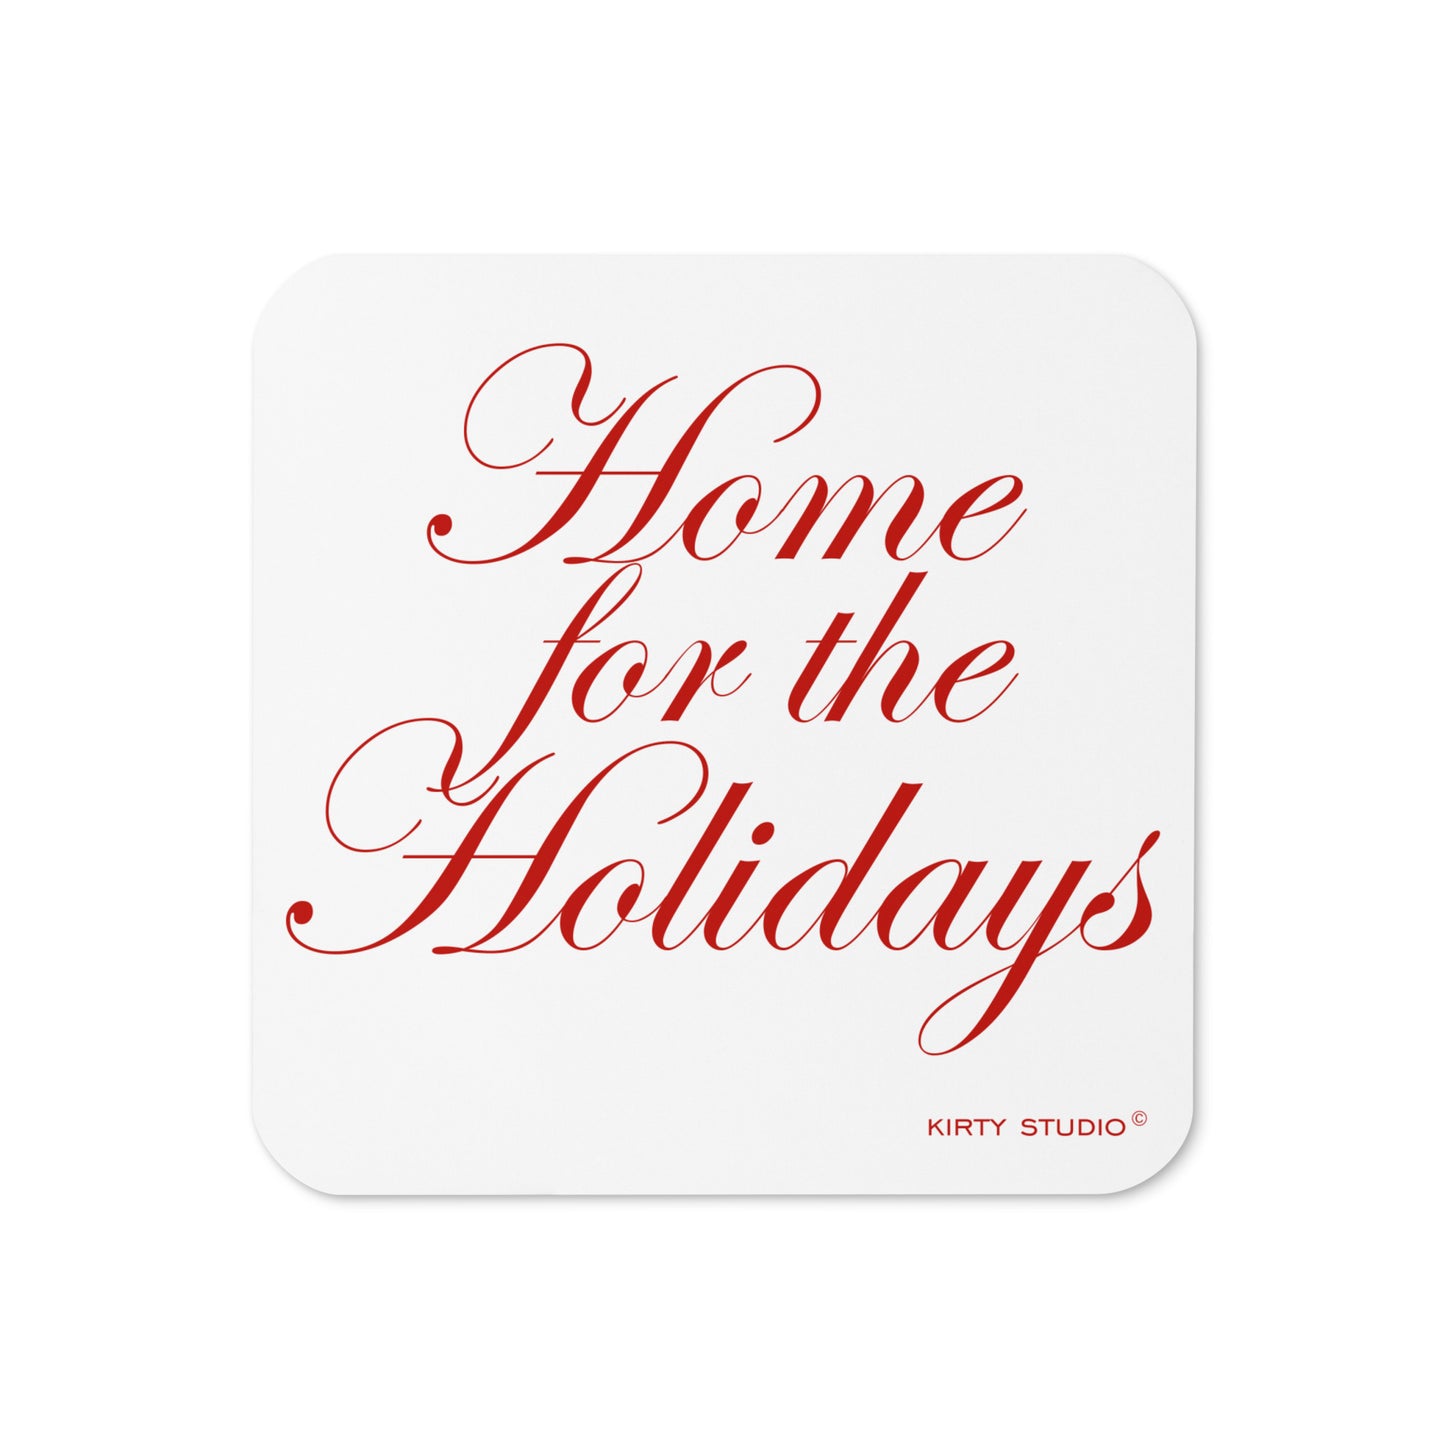 'Home for the Holidays' Coaster